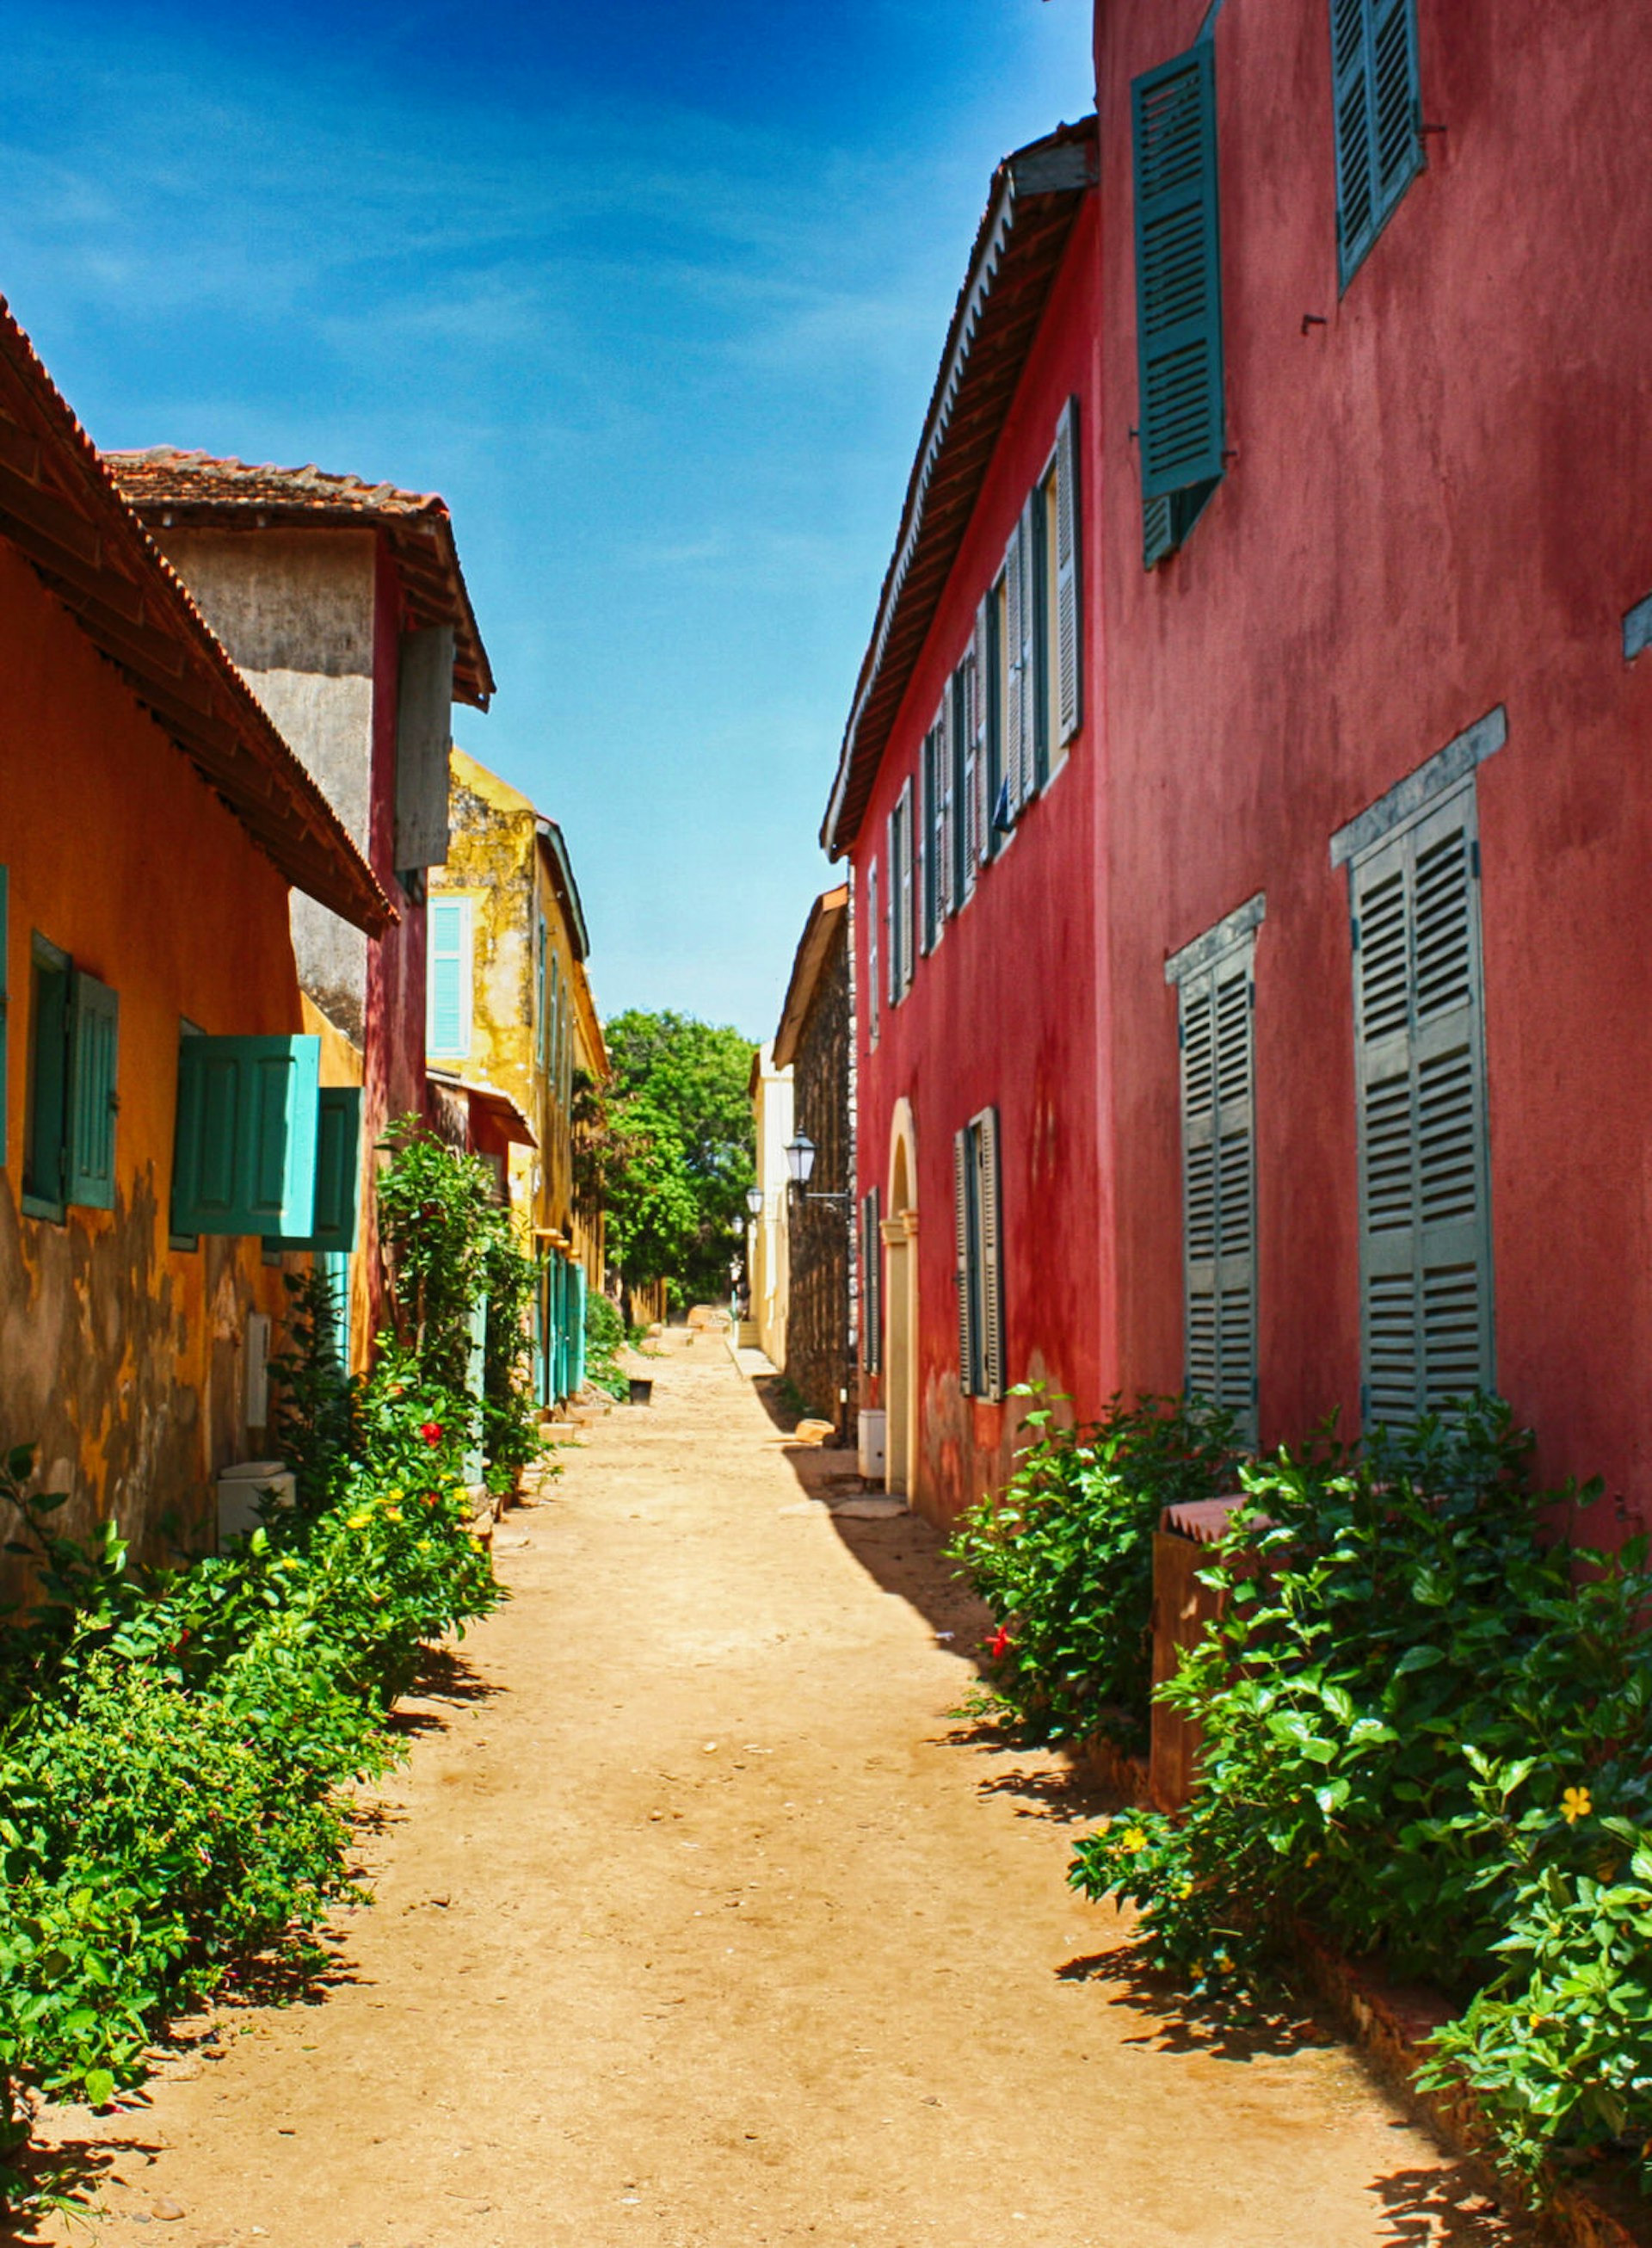 This image is looking straight down a sandy lane on Île de Gorée, with a bright red two-story building on the right and a yellow single-storey building on the left - both buildings have colourful shutters. Vegetation grows along the base of the buildlings © Alex ADS / 500px